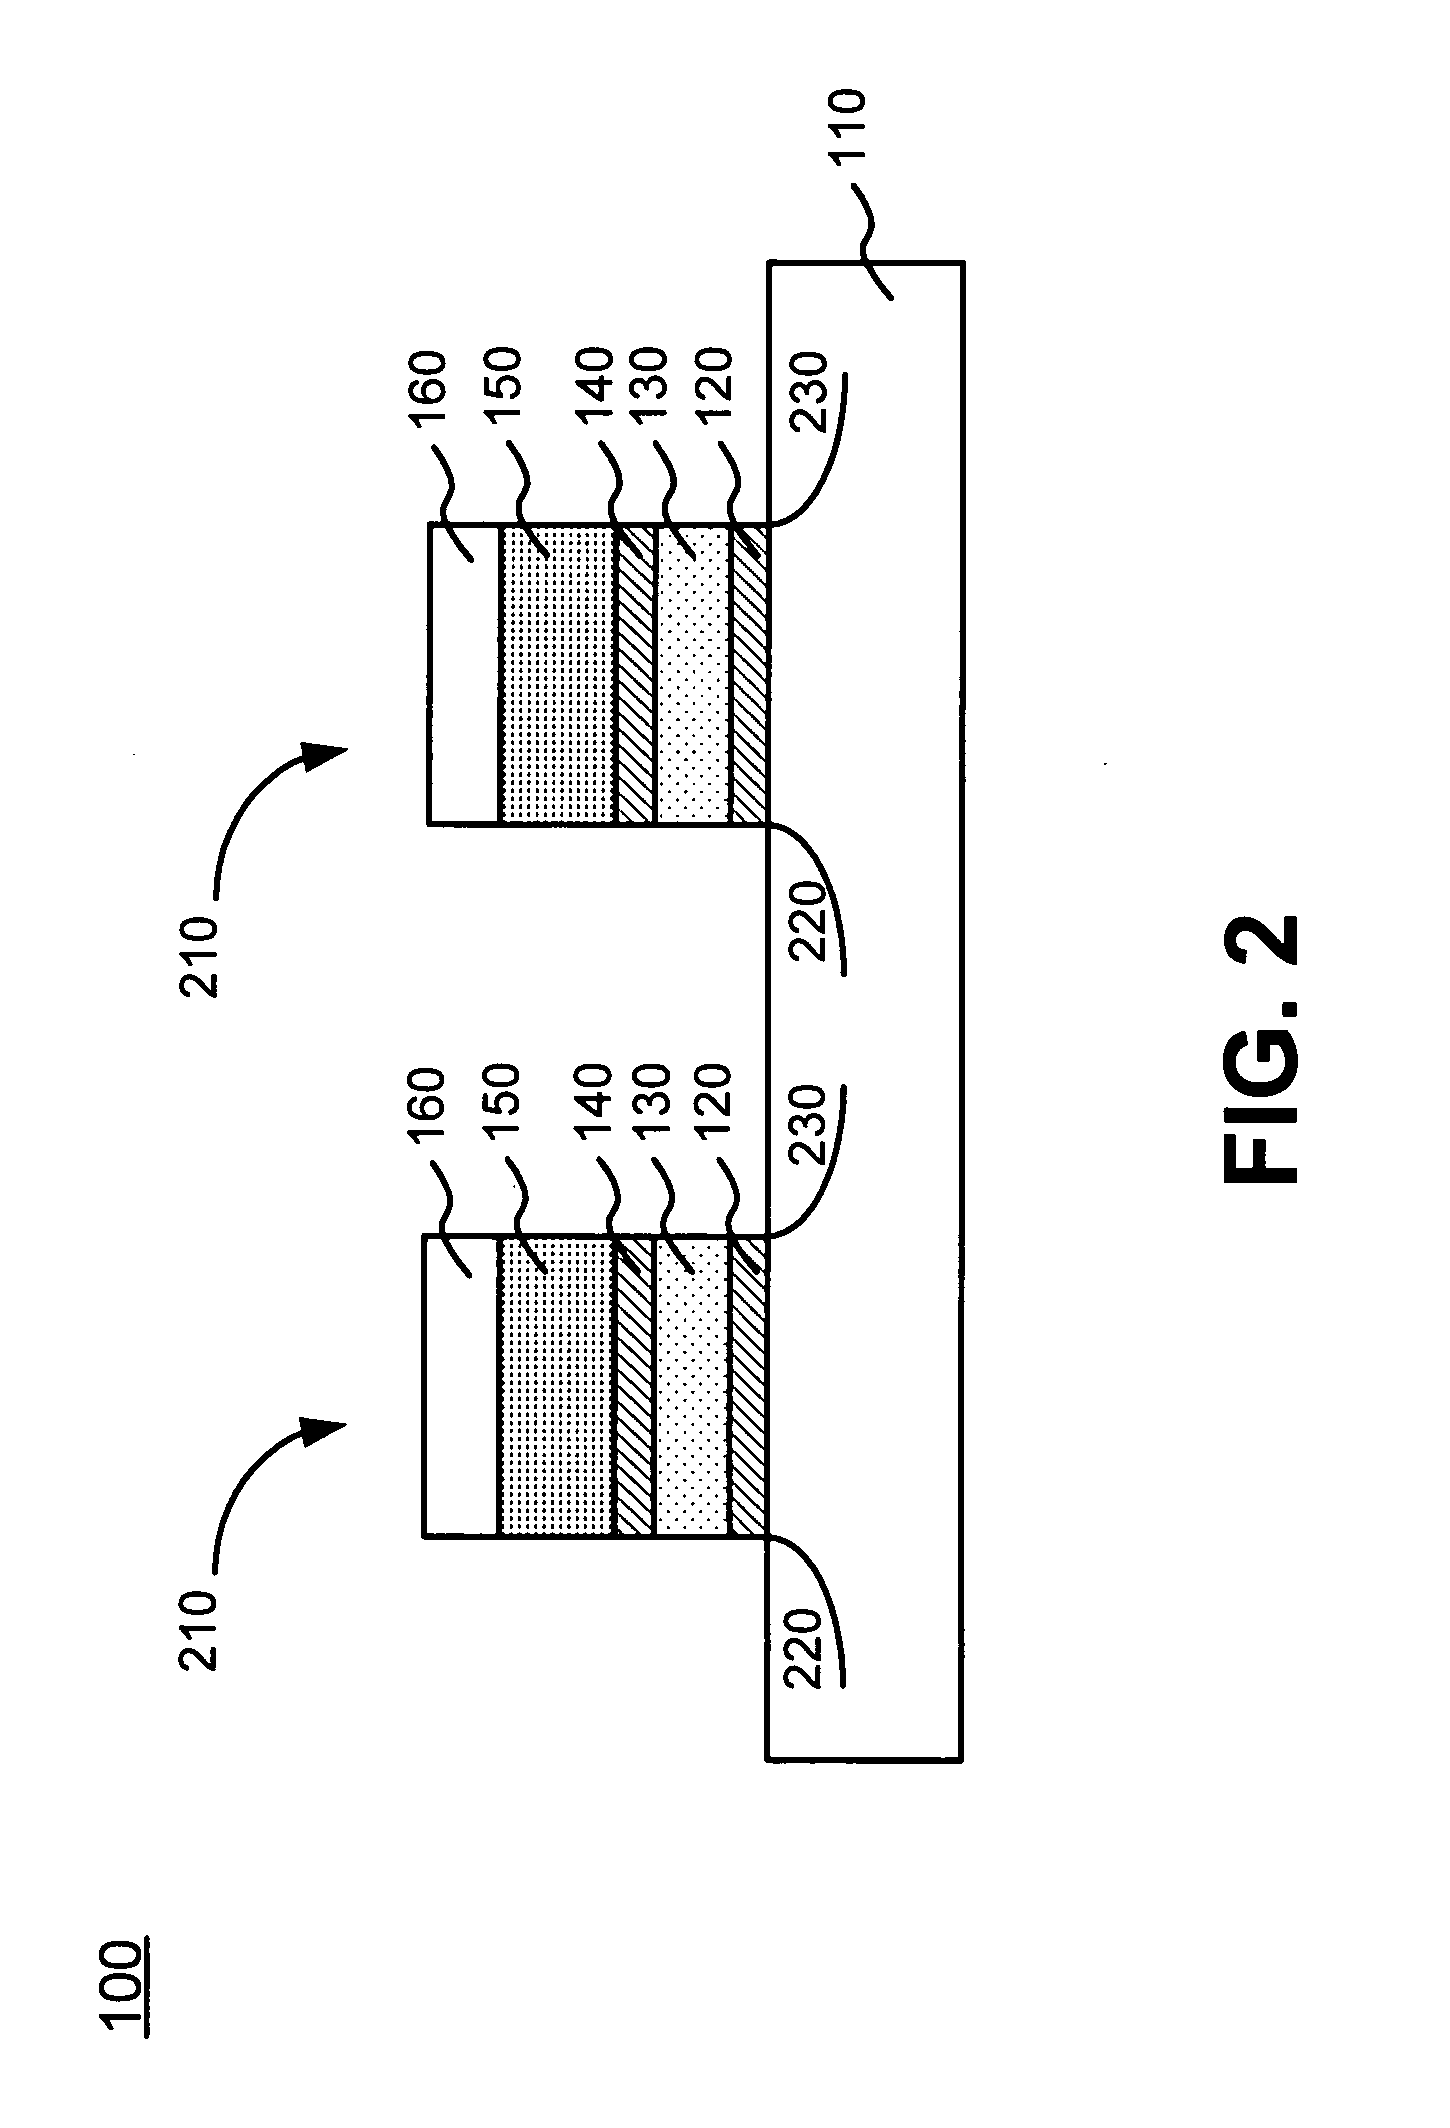 Method for programming a memory device